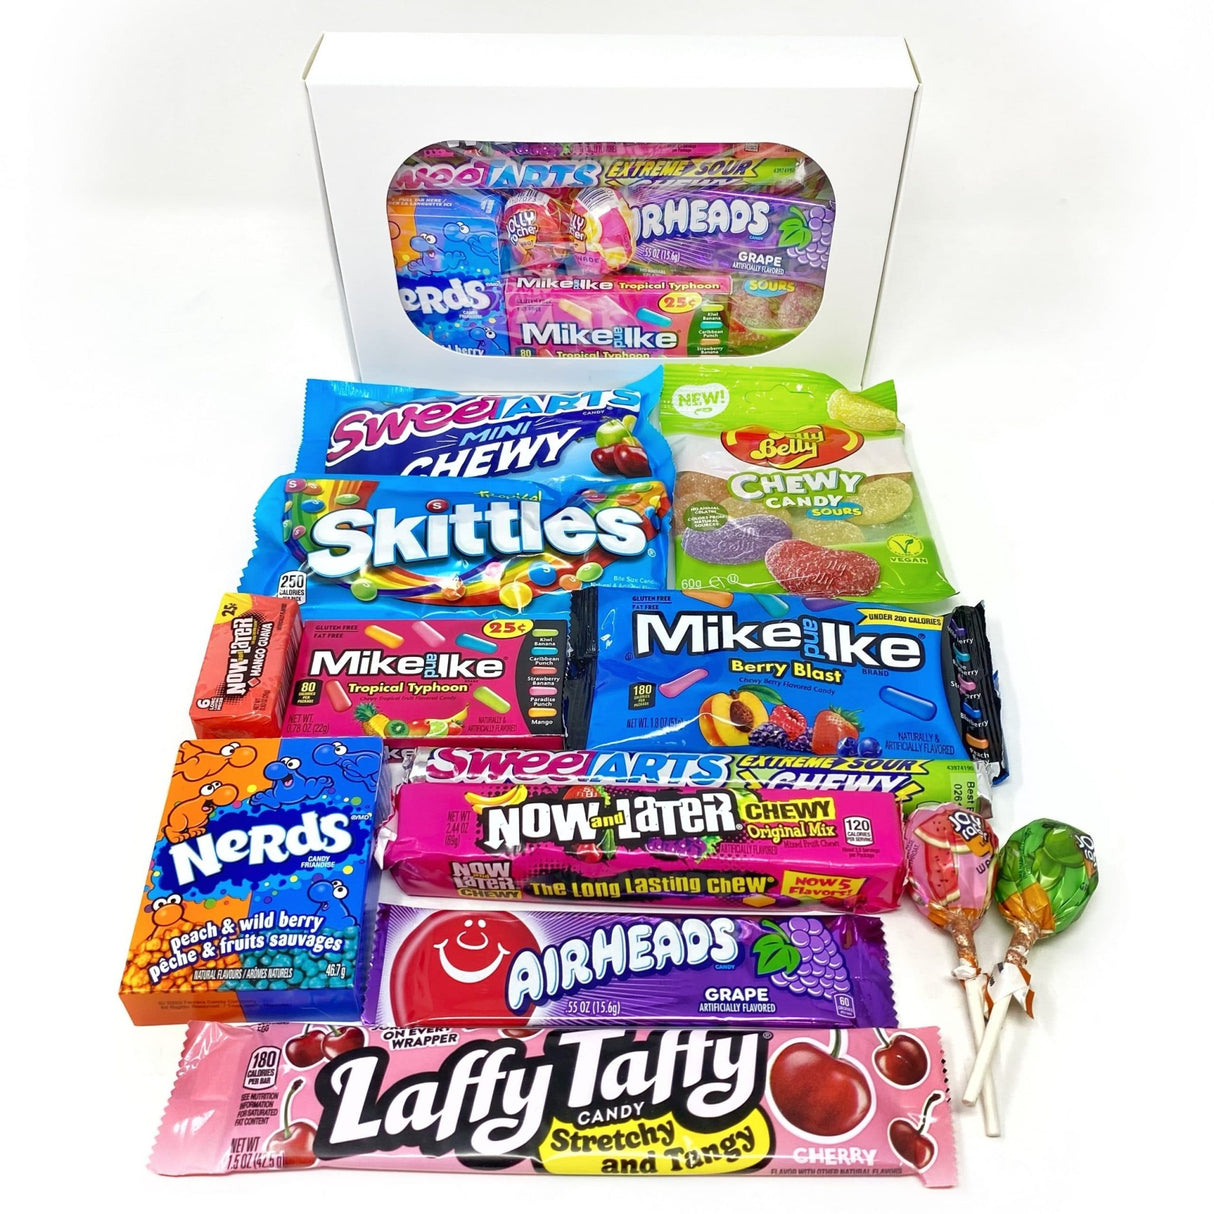 American Candy Selection Box